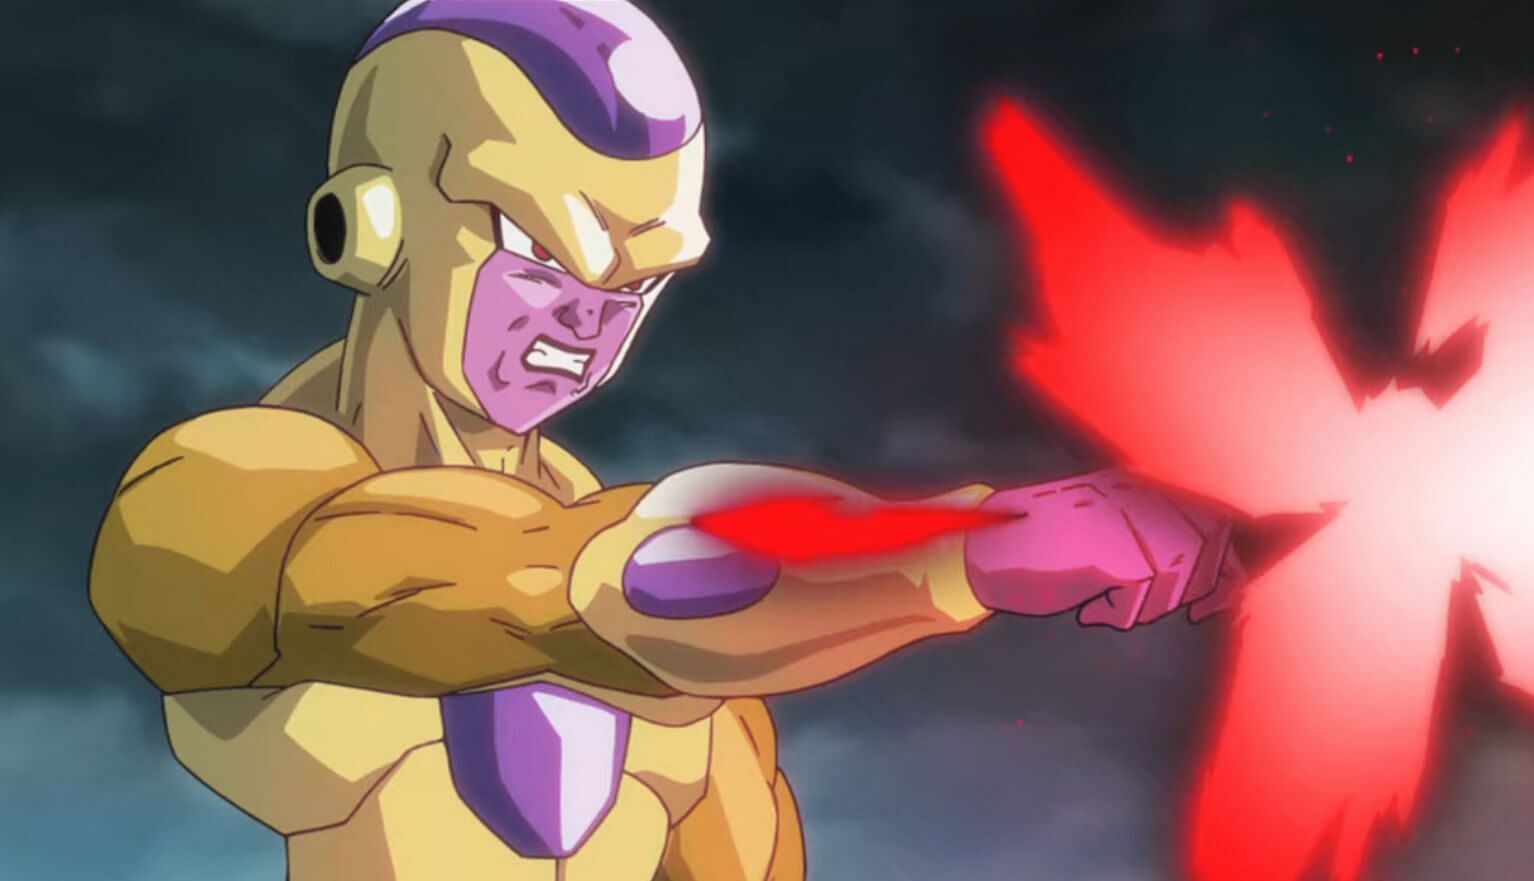 Frieza in his Golden Form (Image via Toei Animation)